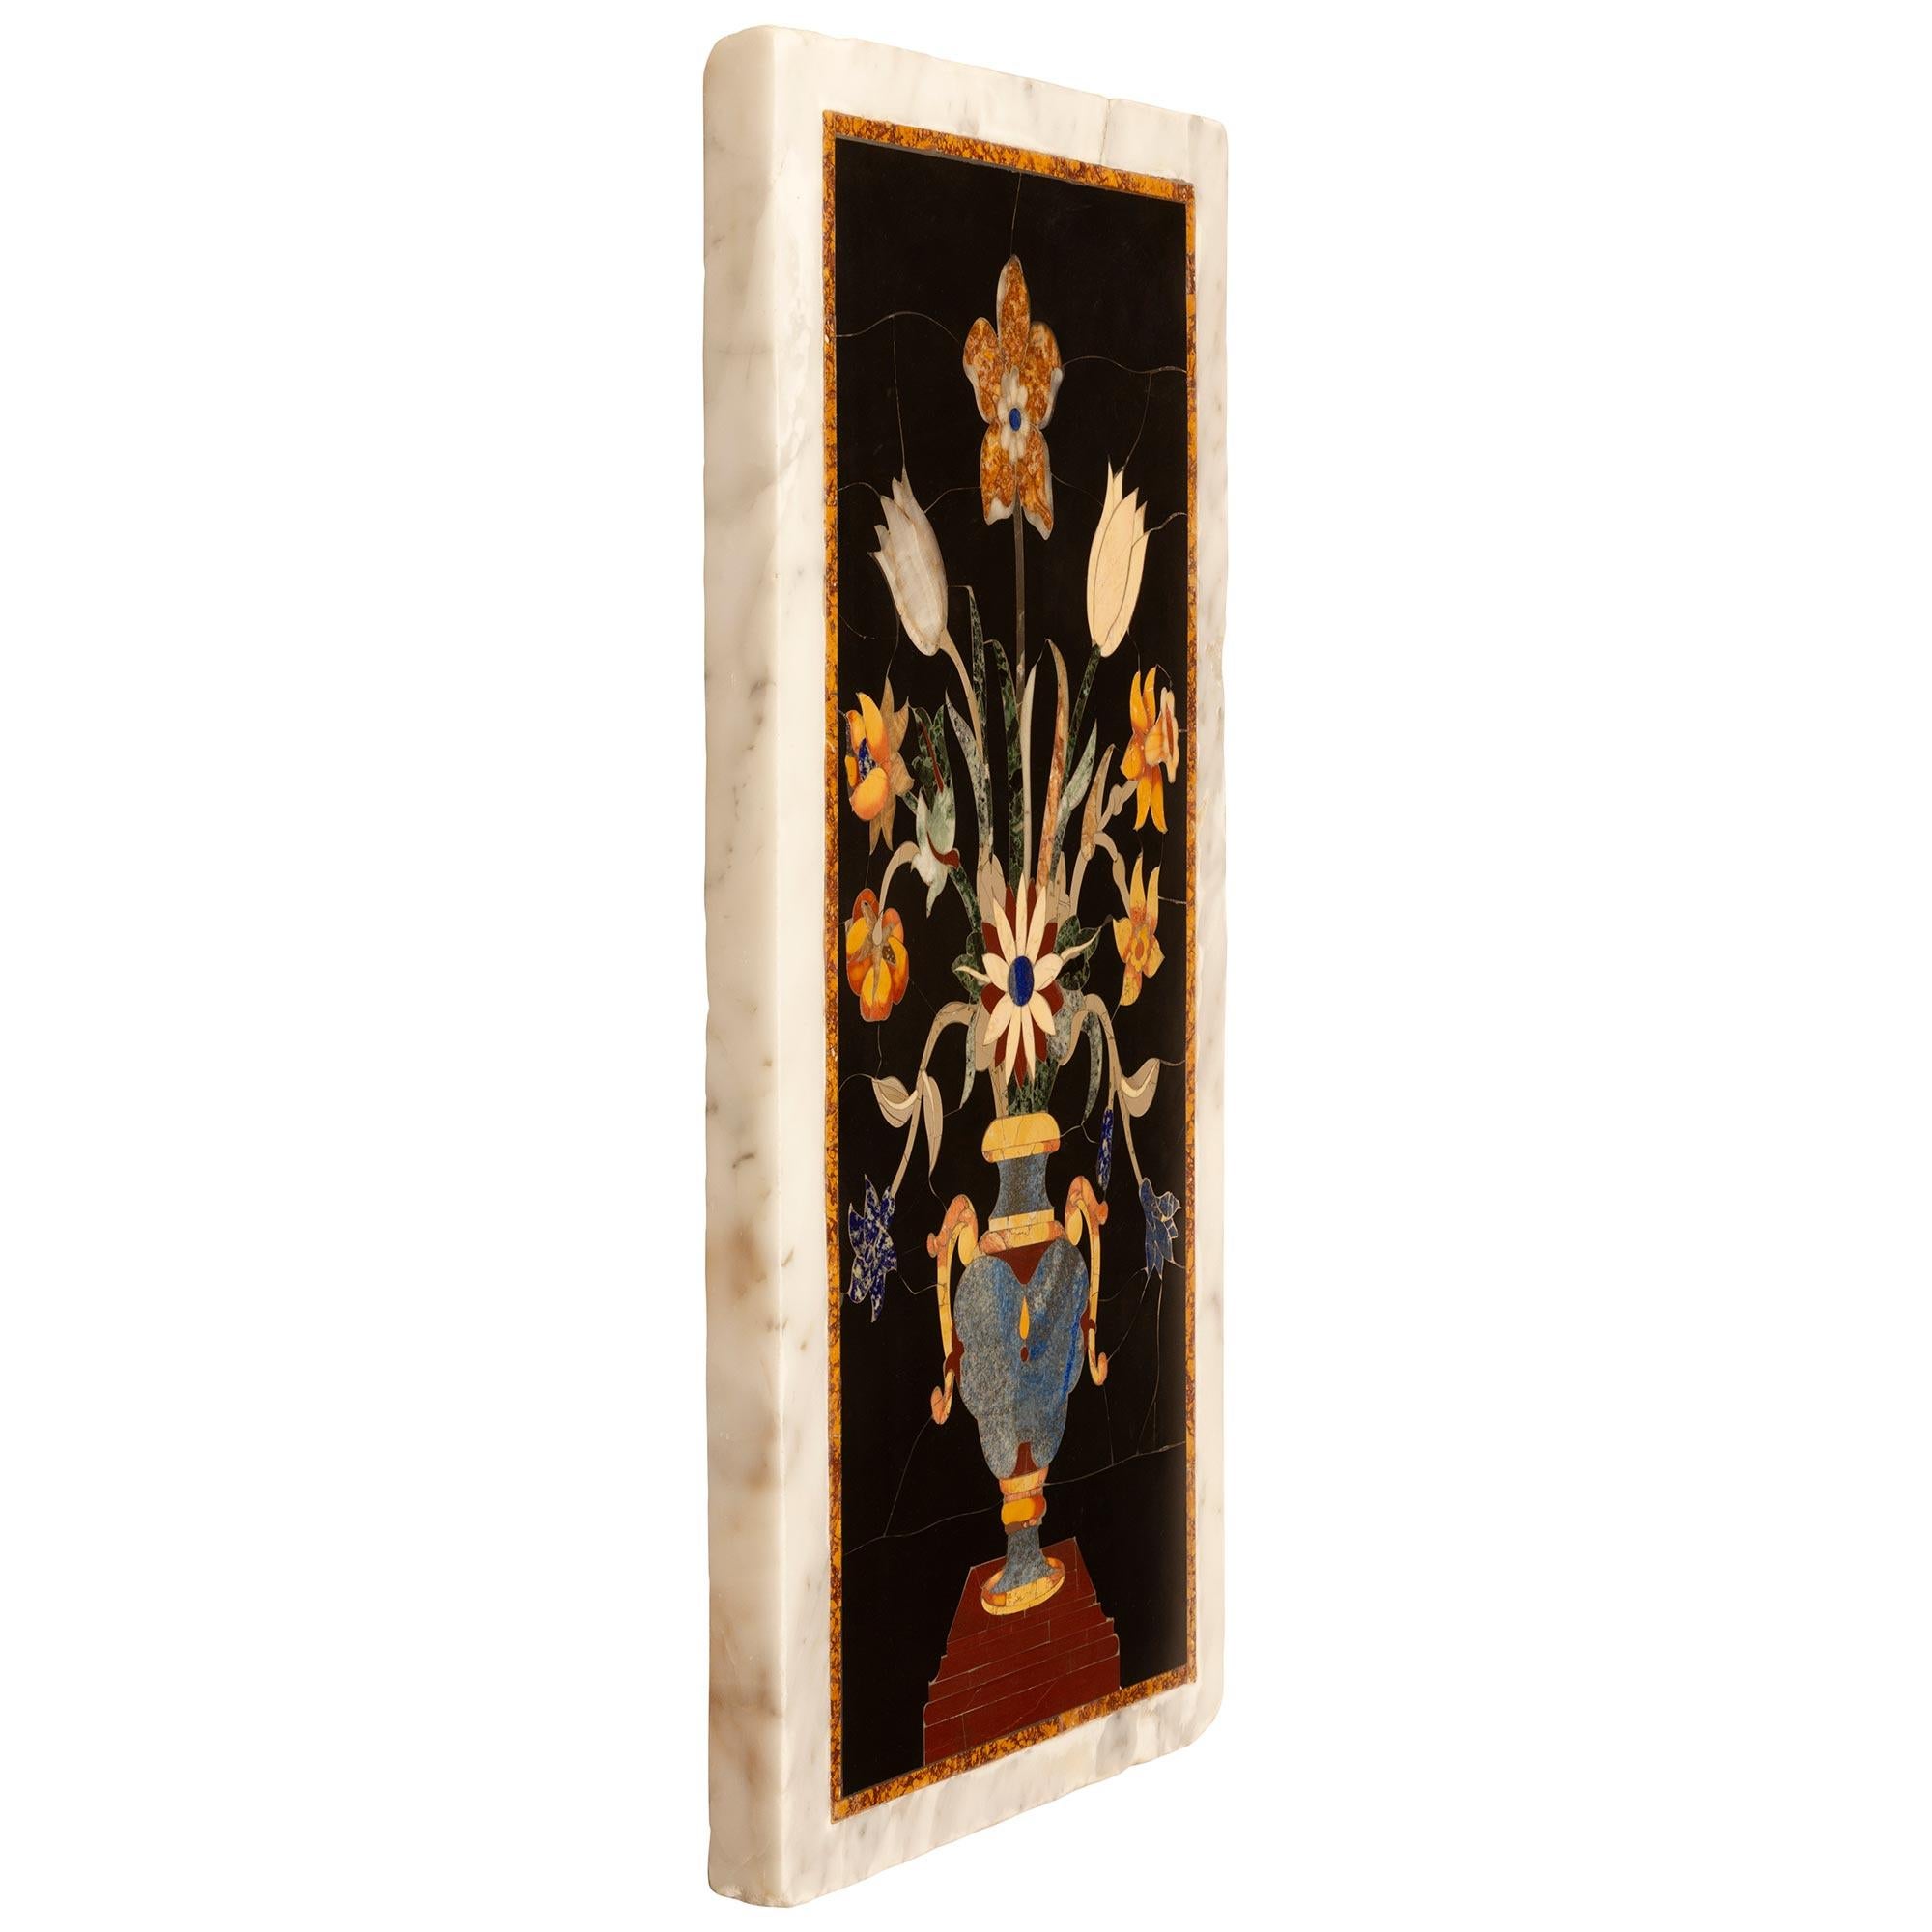 A stunning and most impressive pair of Italian 19th century Pietra Dura marble wall decor plaques. Each solid white carrara marble plaque displays exceptional intricately detailed inlaid blooming flowers in an urn with a an exquisite array of semi